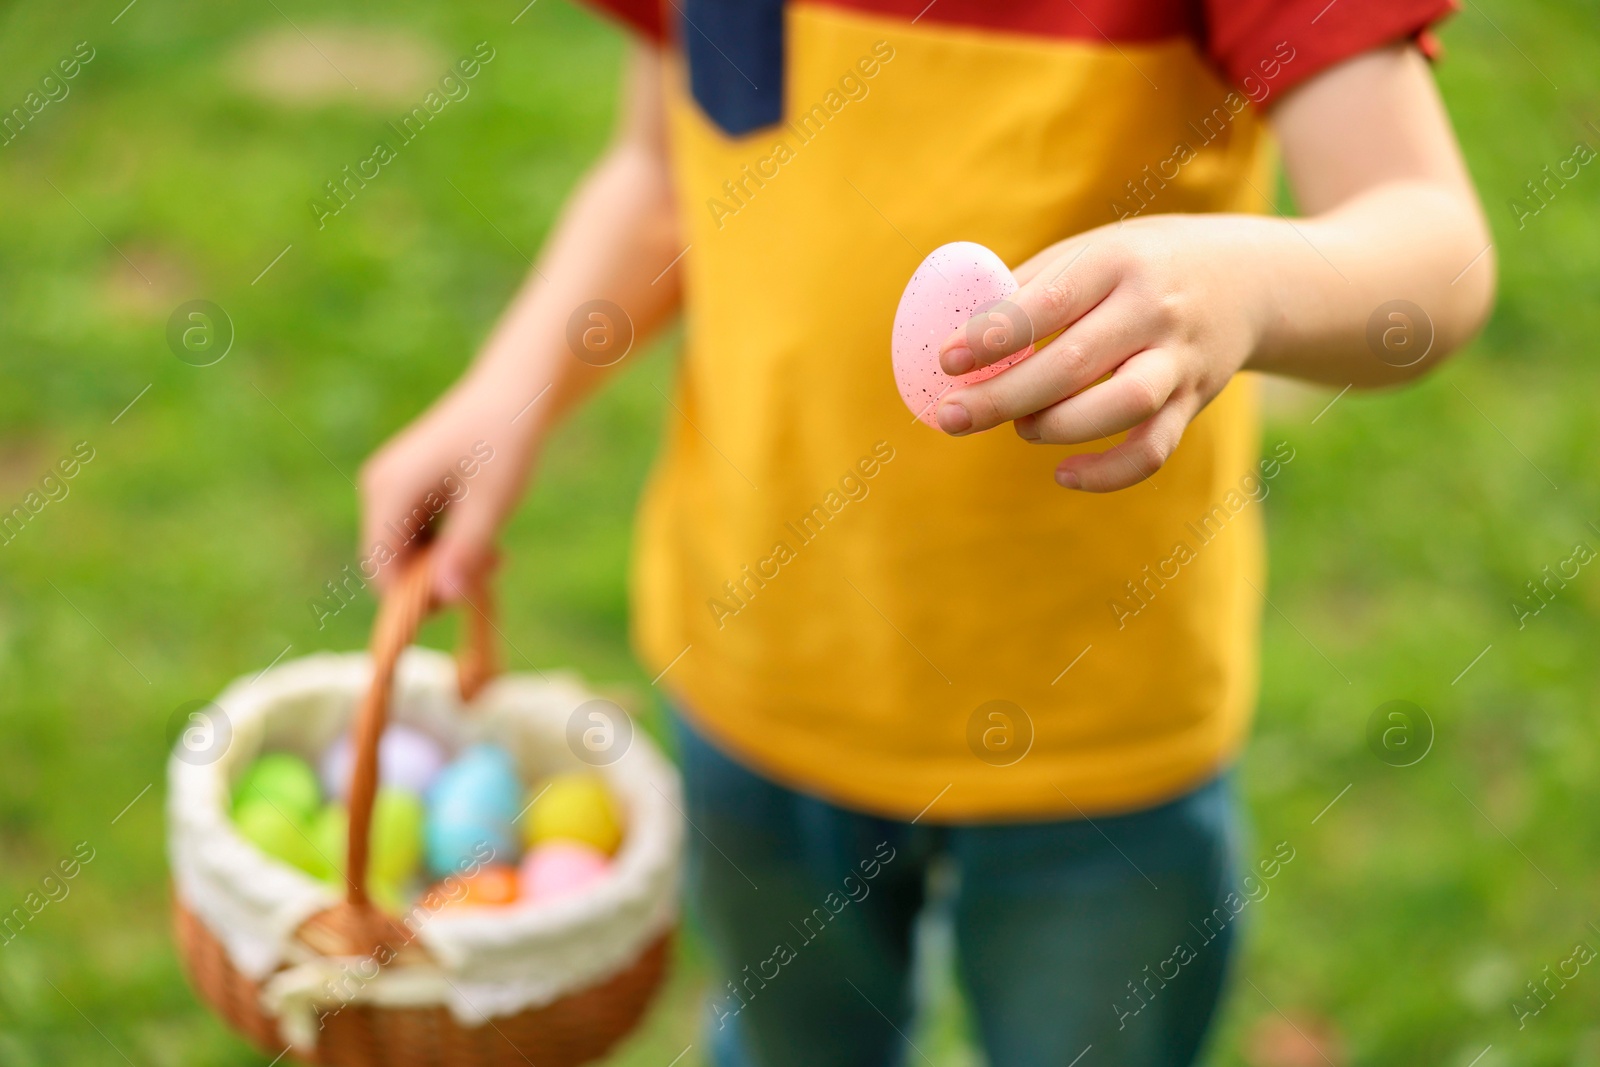 Photo of Easter celebration. Little boy holding basket with painted eggs outdoors, closeup